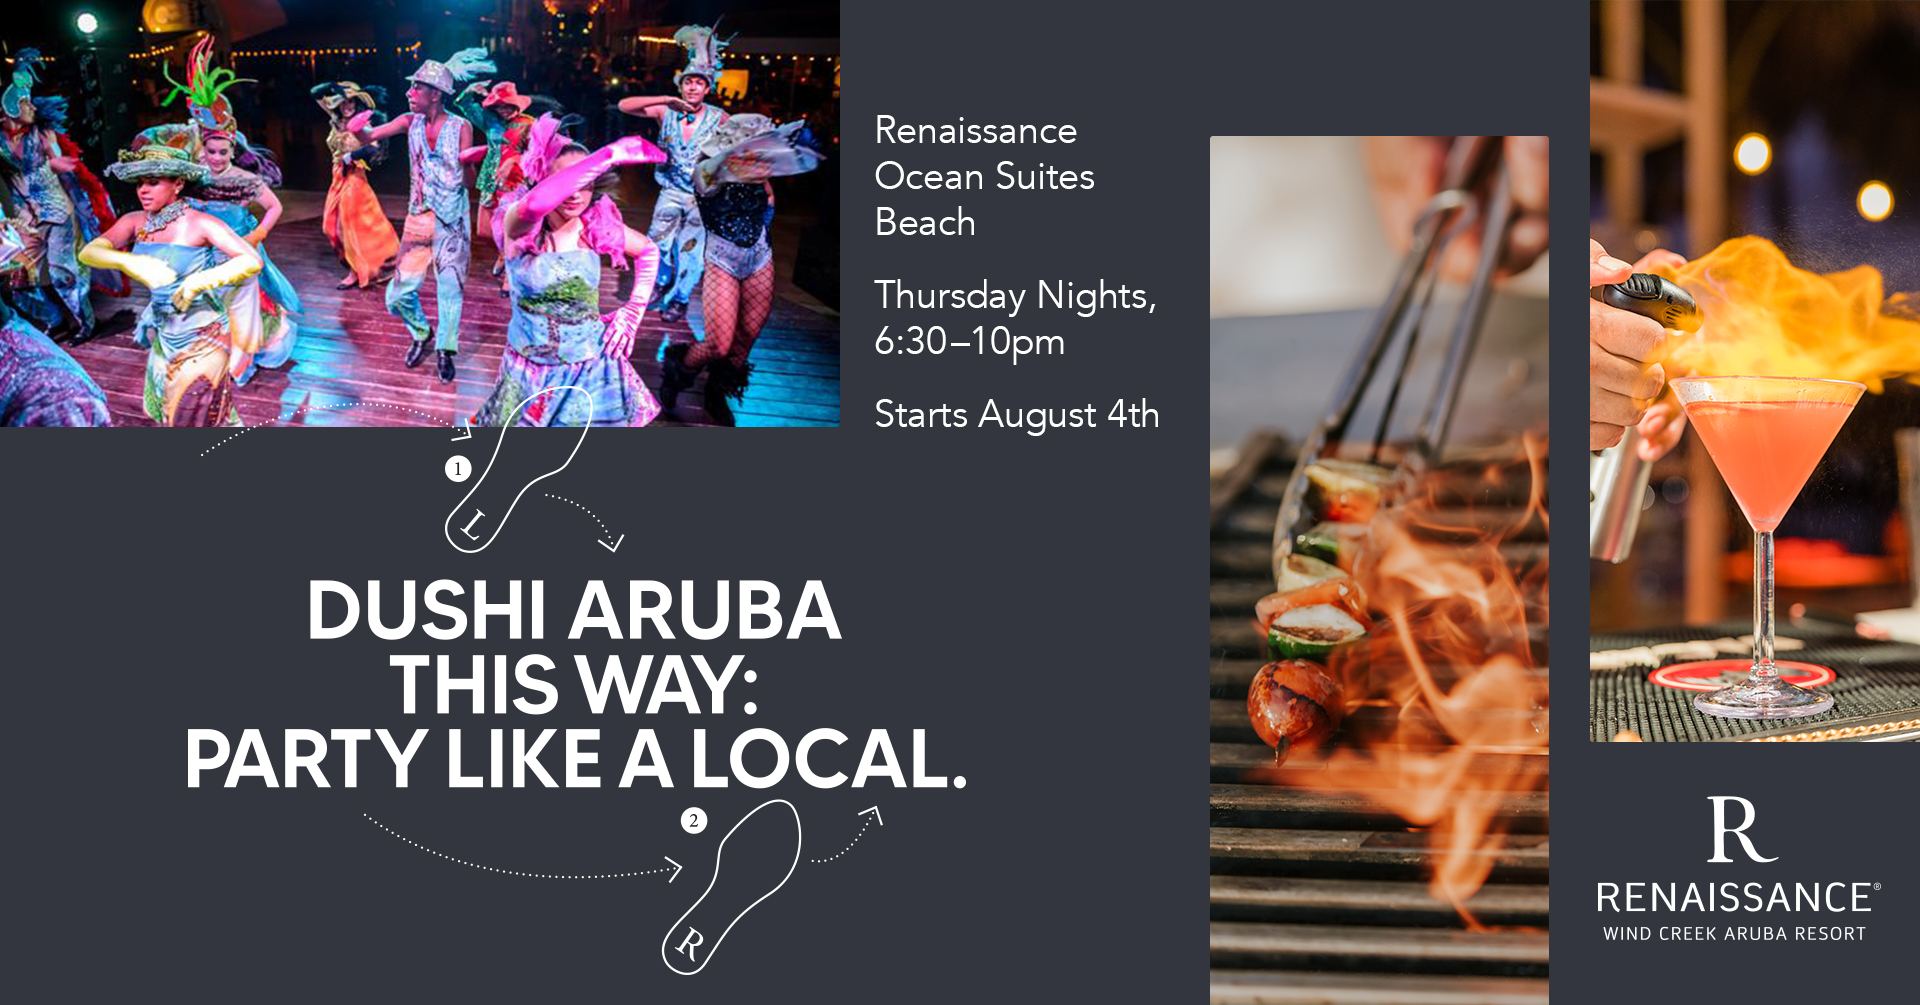 "Dushi Aruba This Way" - Party Like a Local!